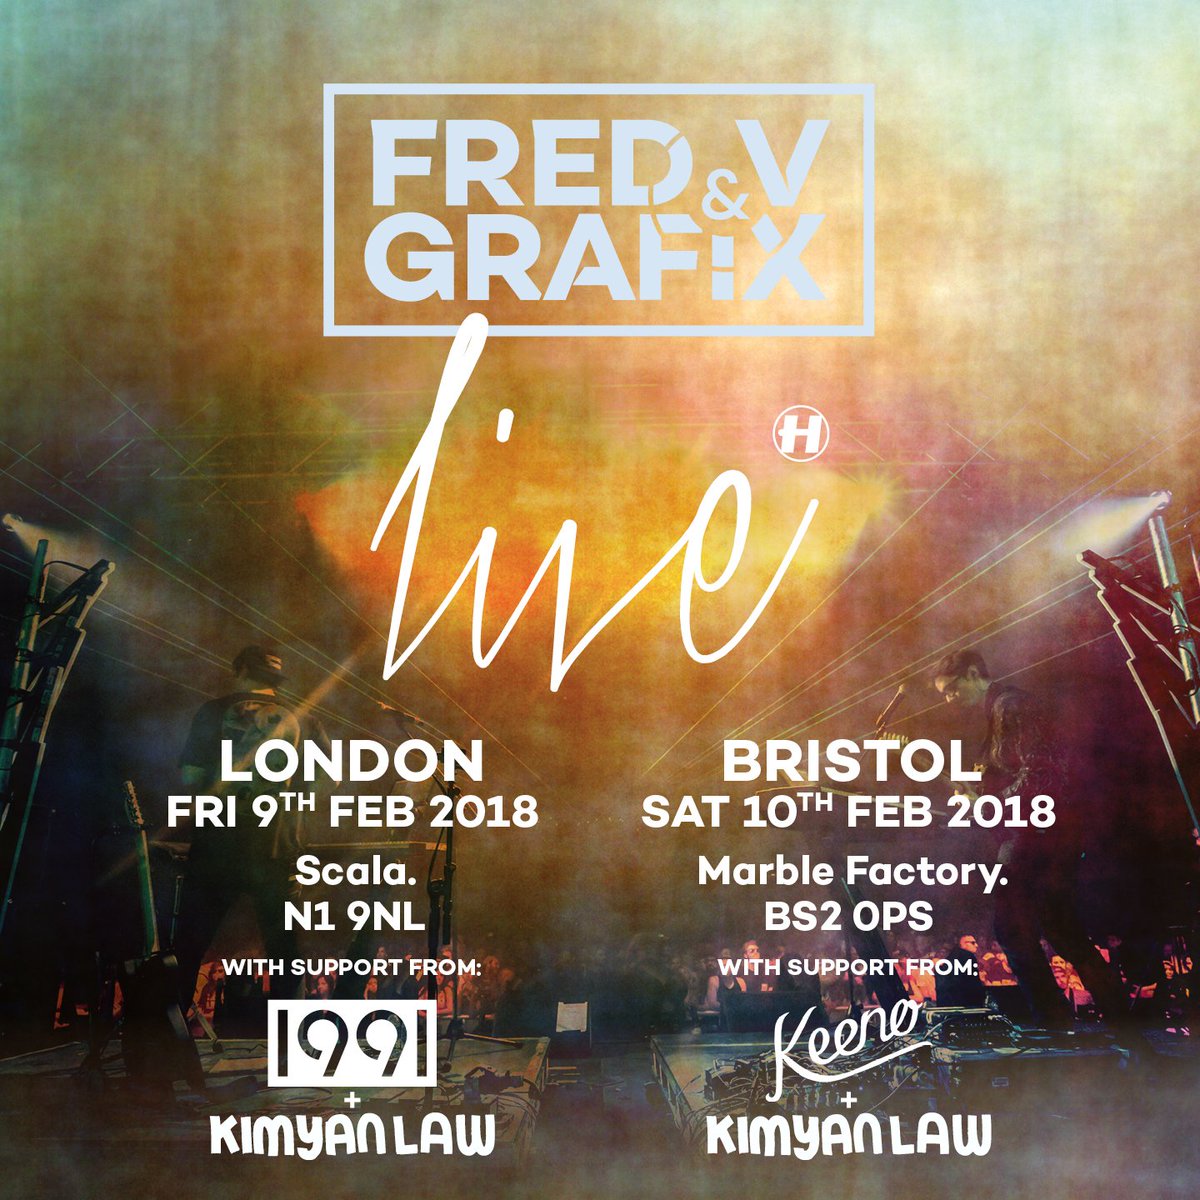 This weekend, @fredvgrafix sill be bringing their incredible live show to @ScalaLondon on Friday and @MarbleFactoryUK in Bristol on Saturday. With support from @1991_Music, @KimyanLaw & @keenodnb, the time to get your tickets in is now! Only a few left! fredvandgrafix.com/live/